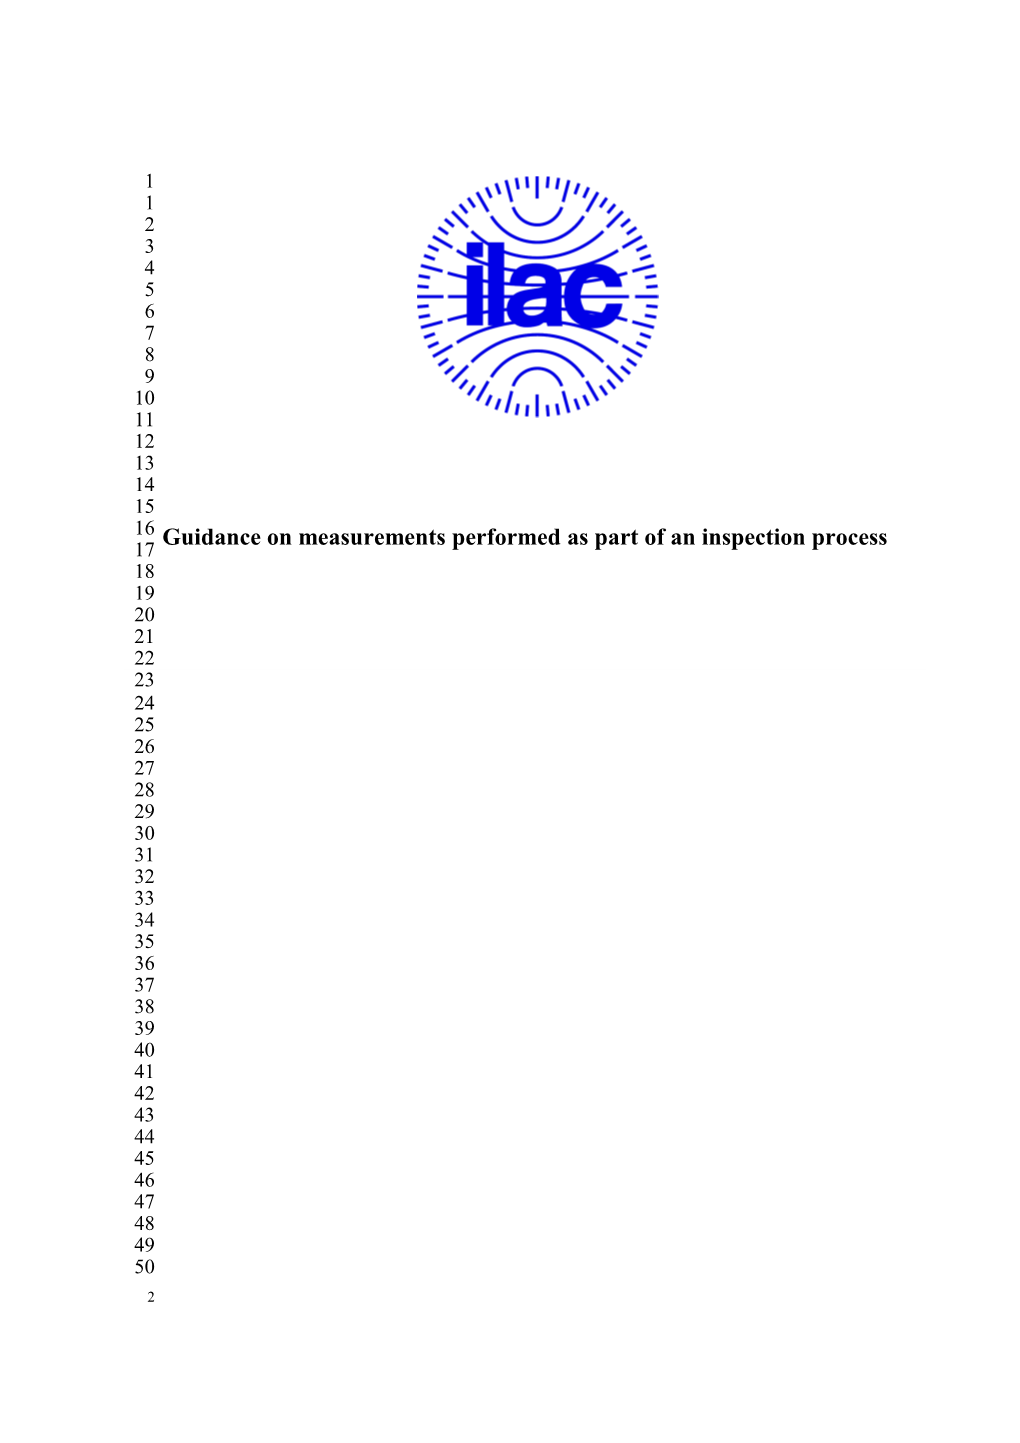 ILAC GXX: 201X Guidance on Measurements Performed As Part of an Inspection Process